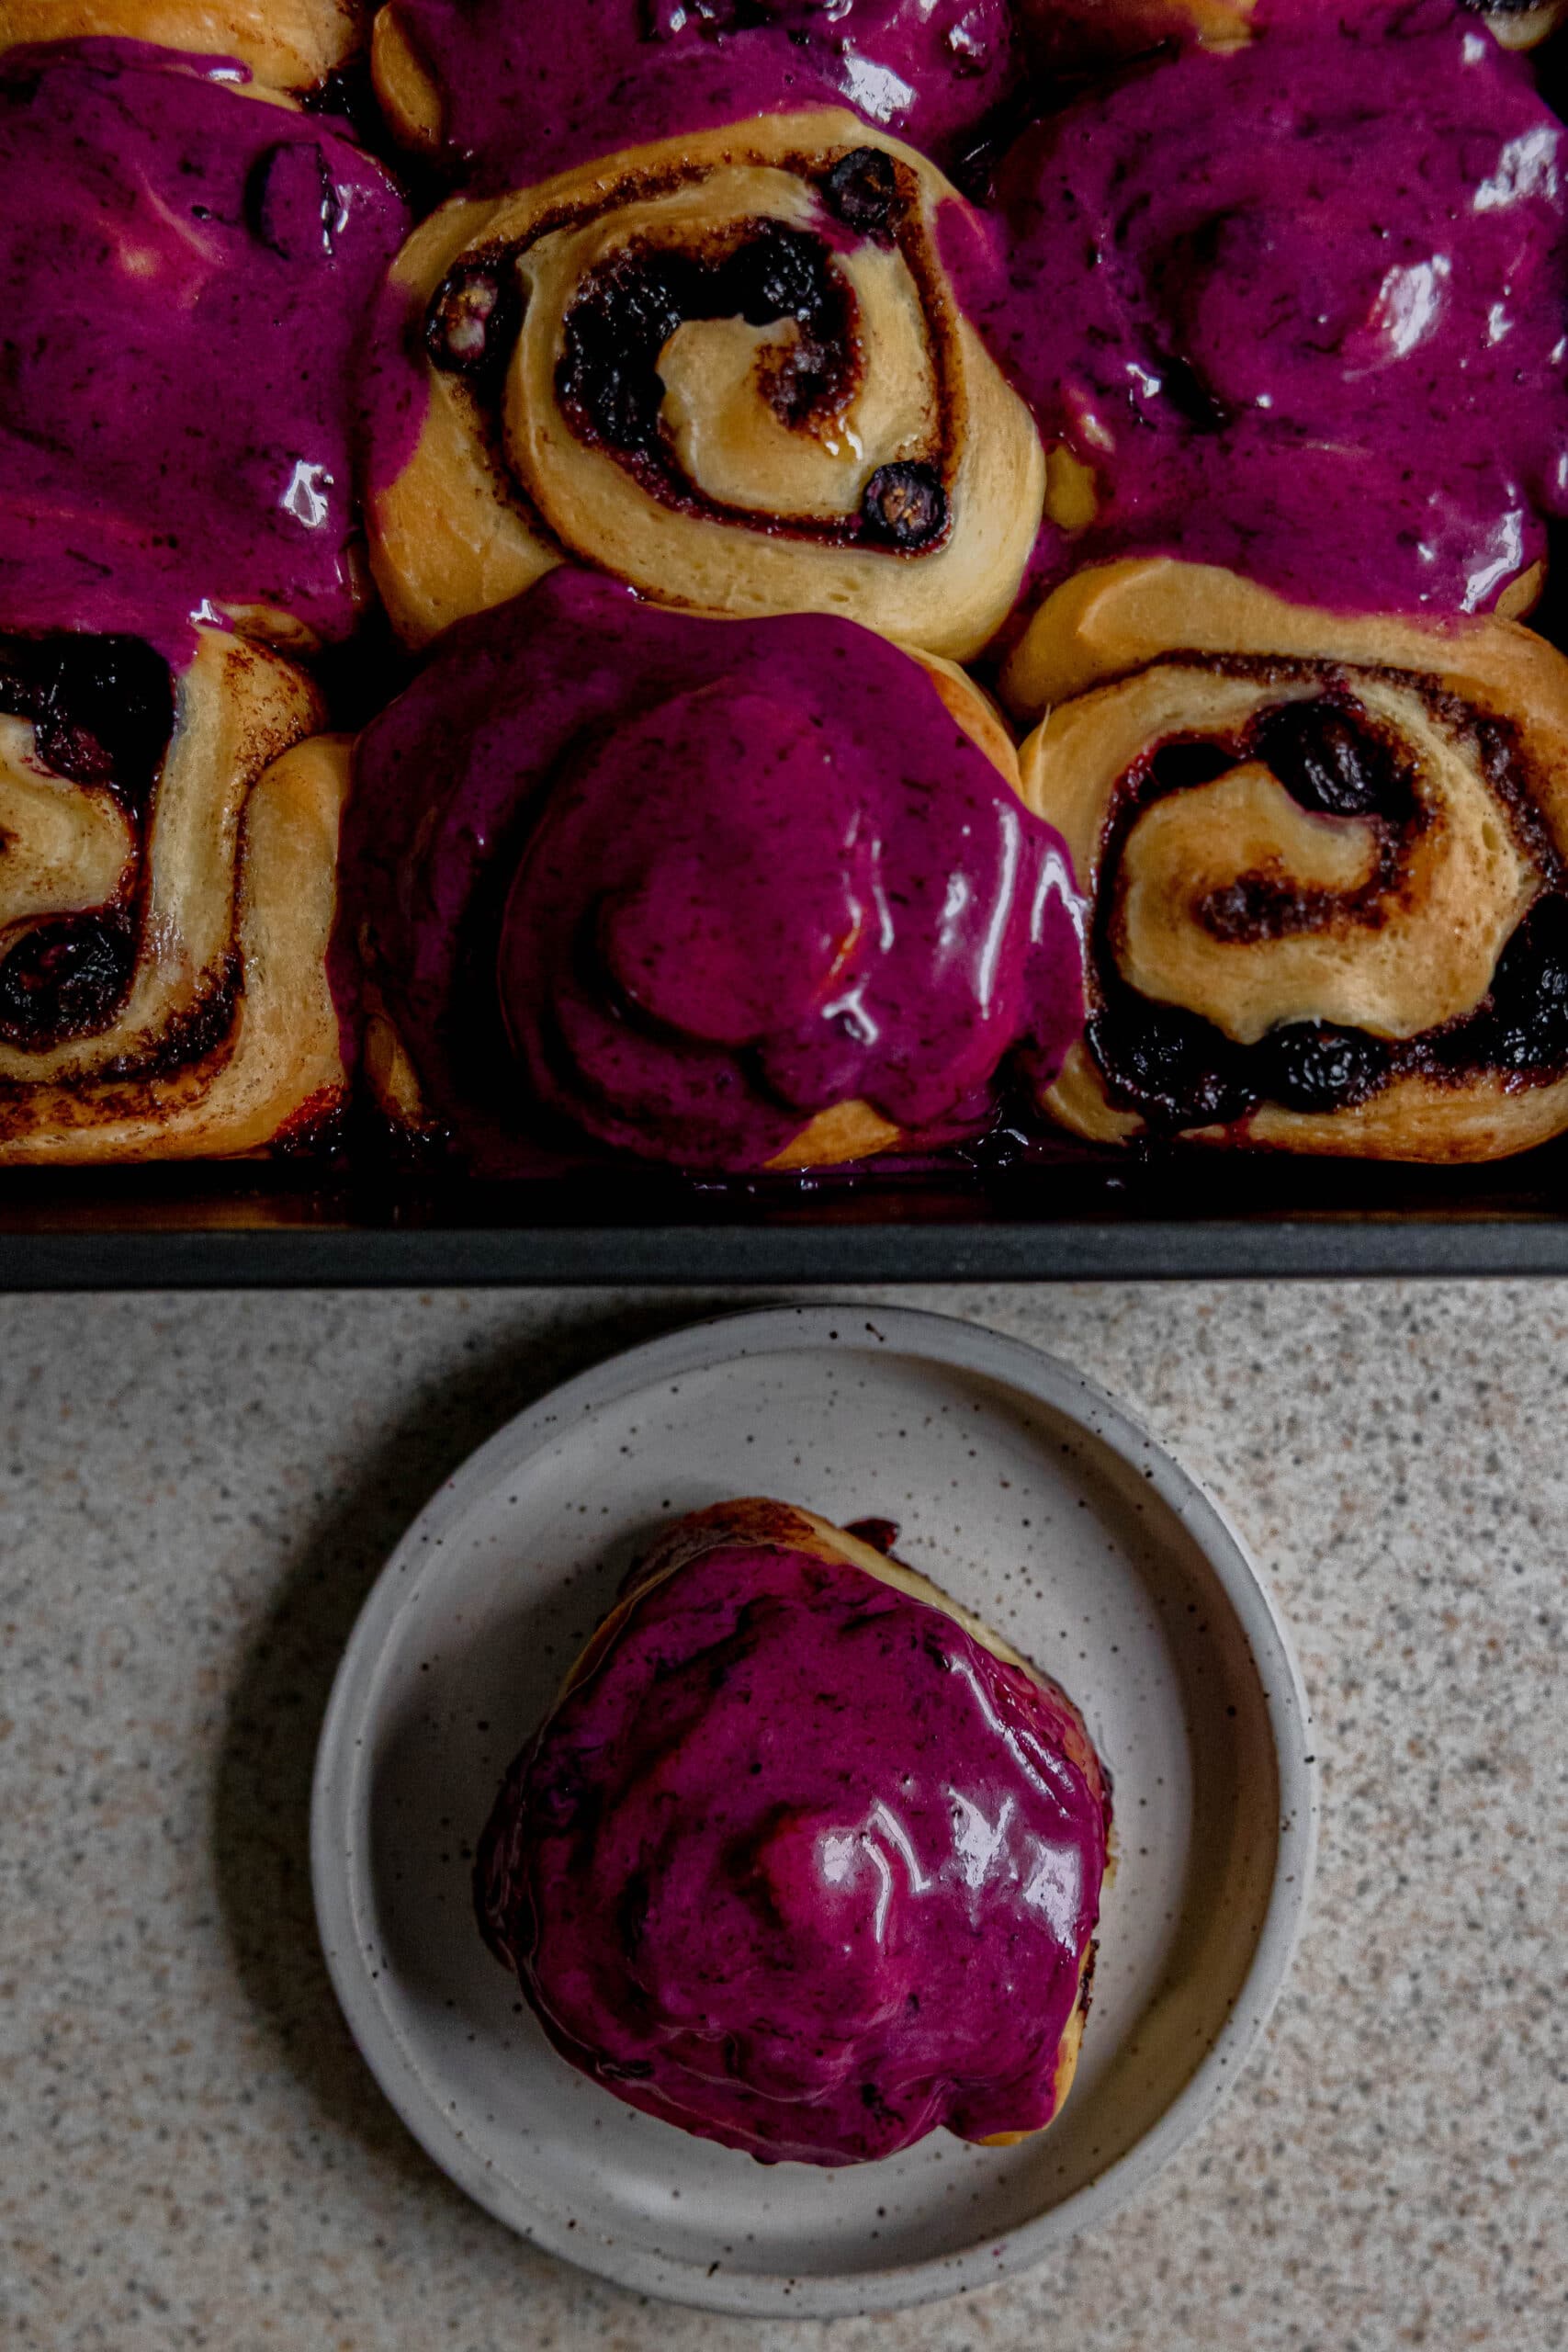 A tray of blueberry cinnamon rolls and a single roll on a plate ready to be eaten